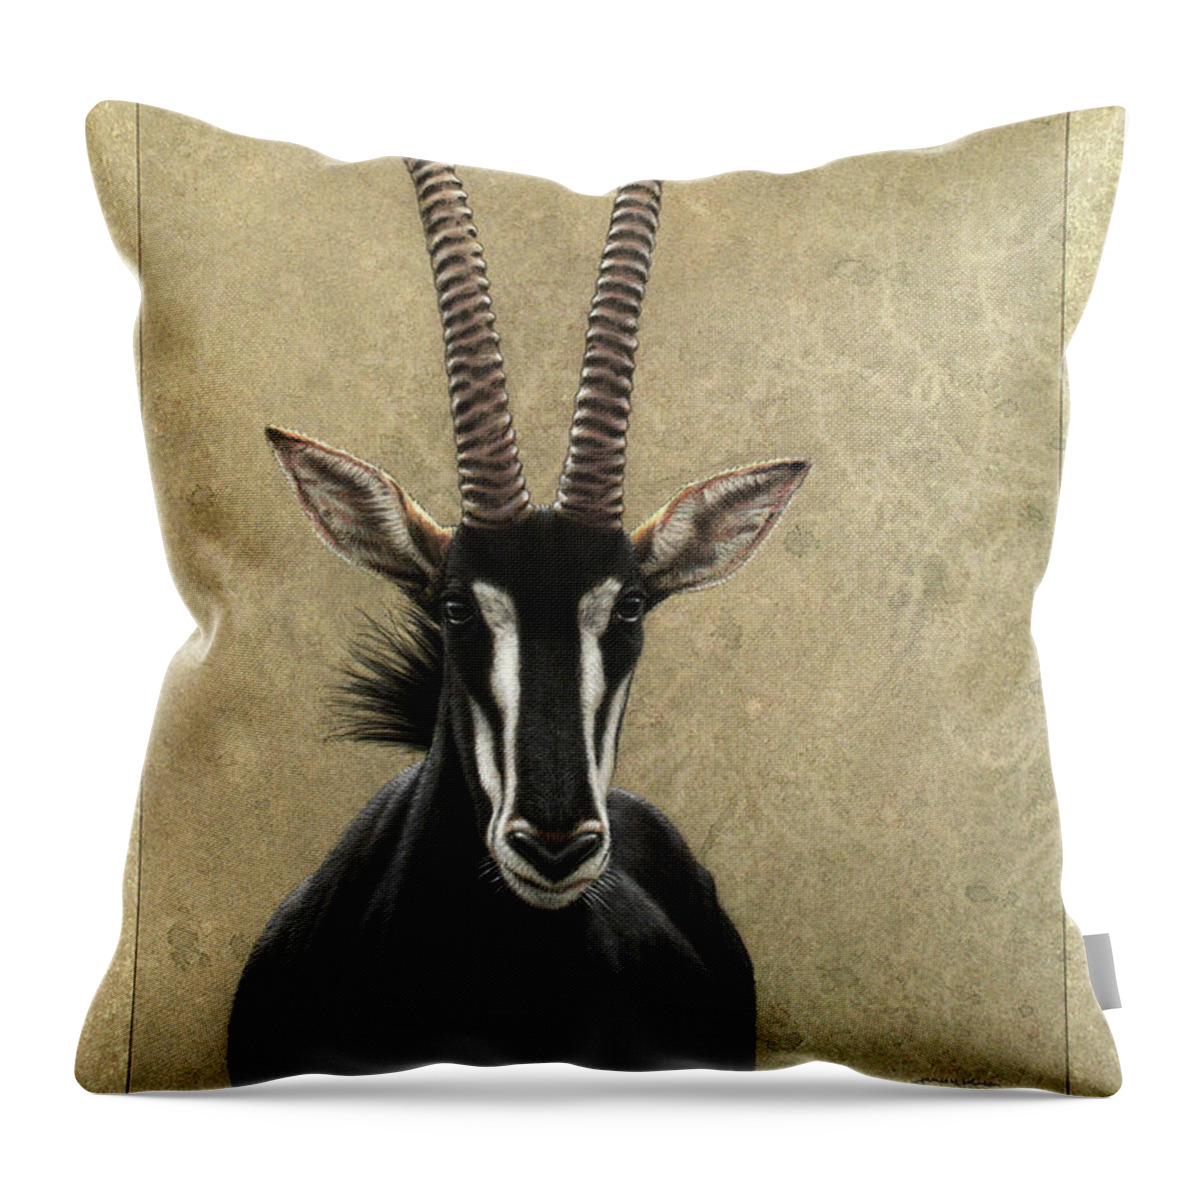 Sable Throw Pillow featuring the painting Sable by James W Johnson